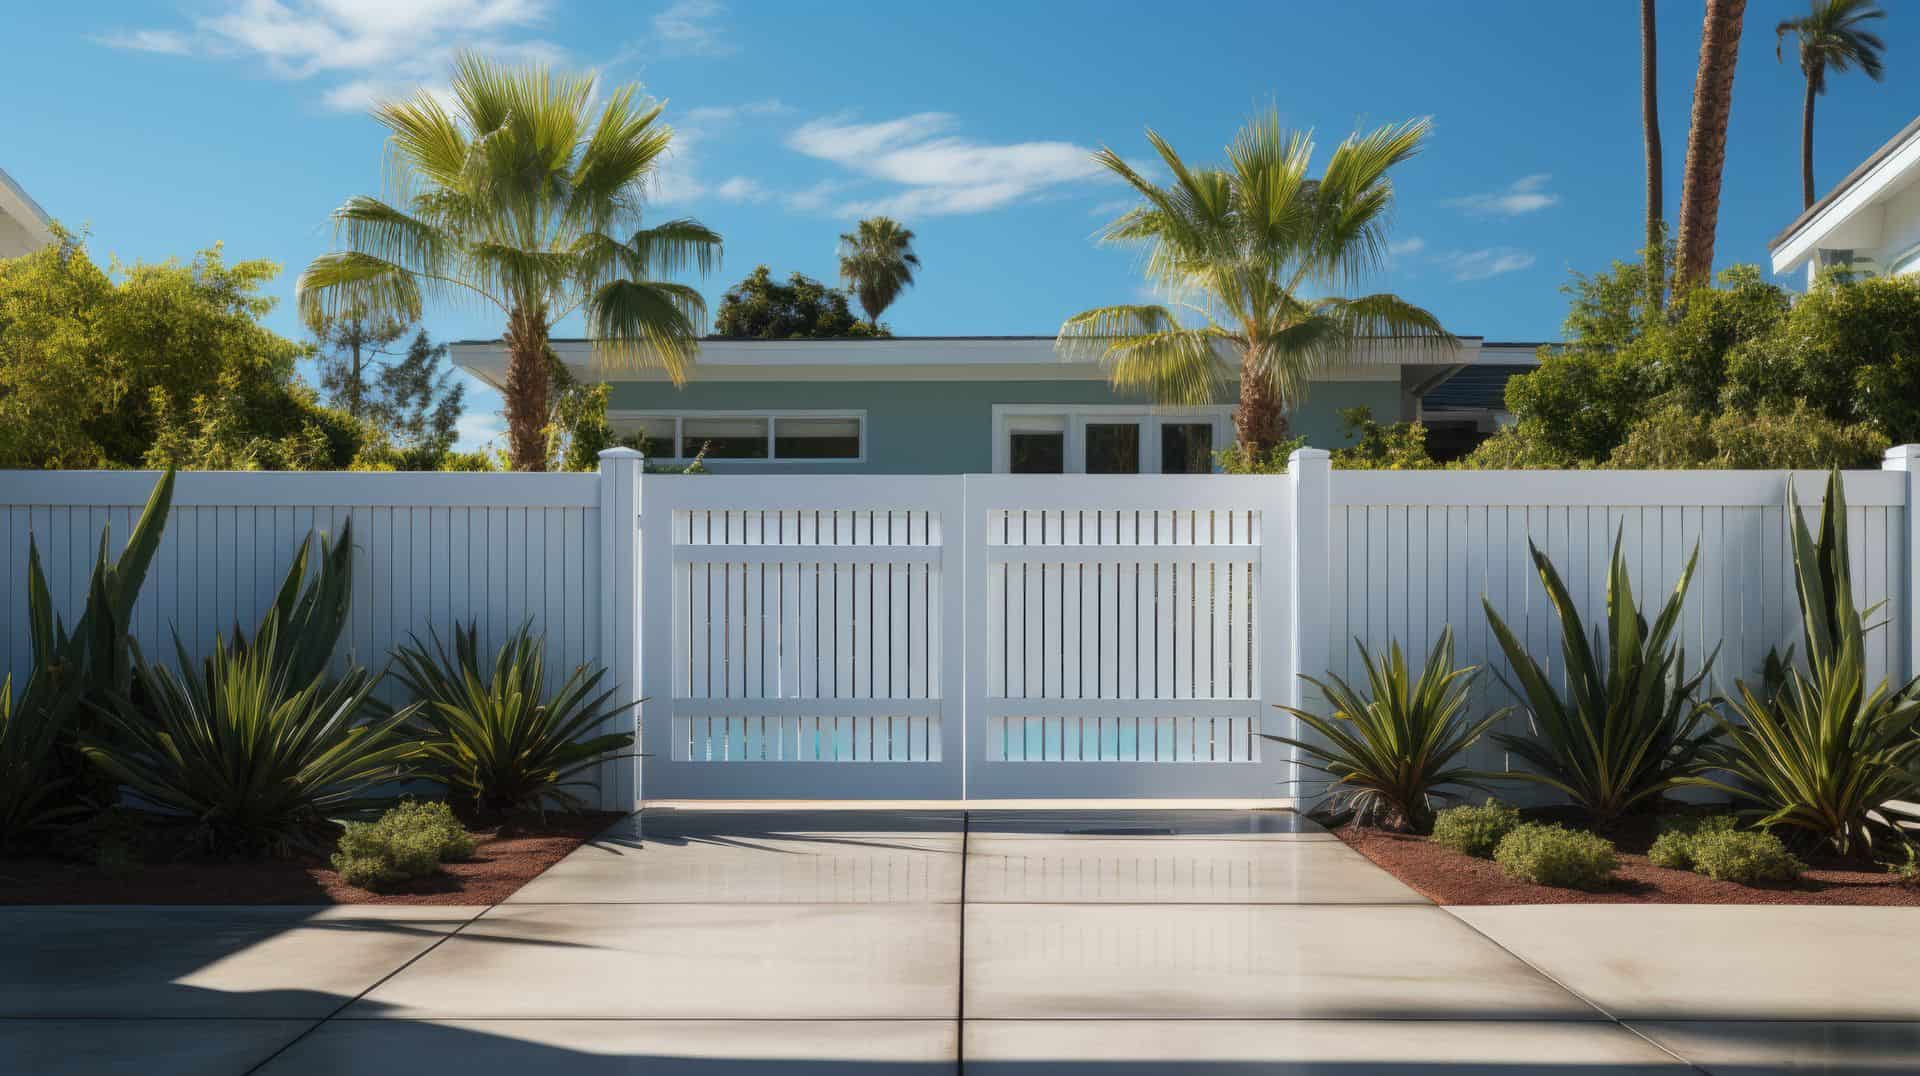 Vinyl fence gate & concrete floor by poolside of modern suburban house. A serene setting with trees in background.